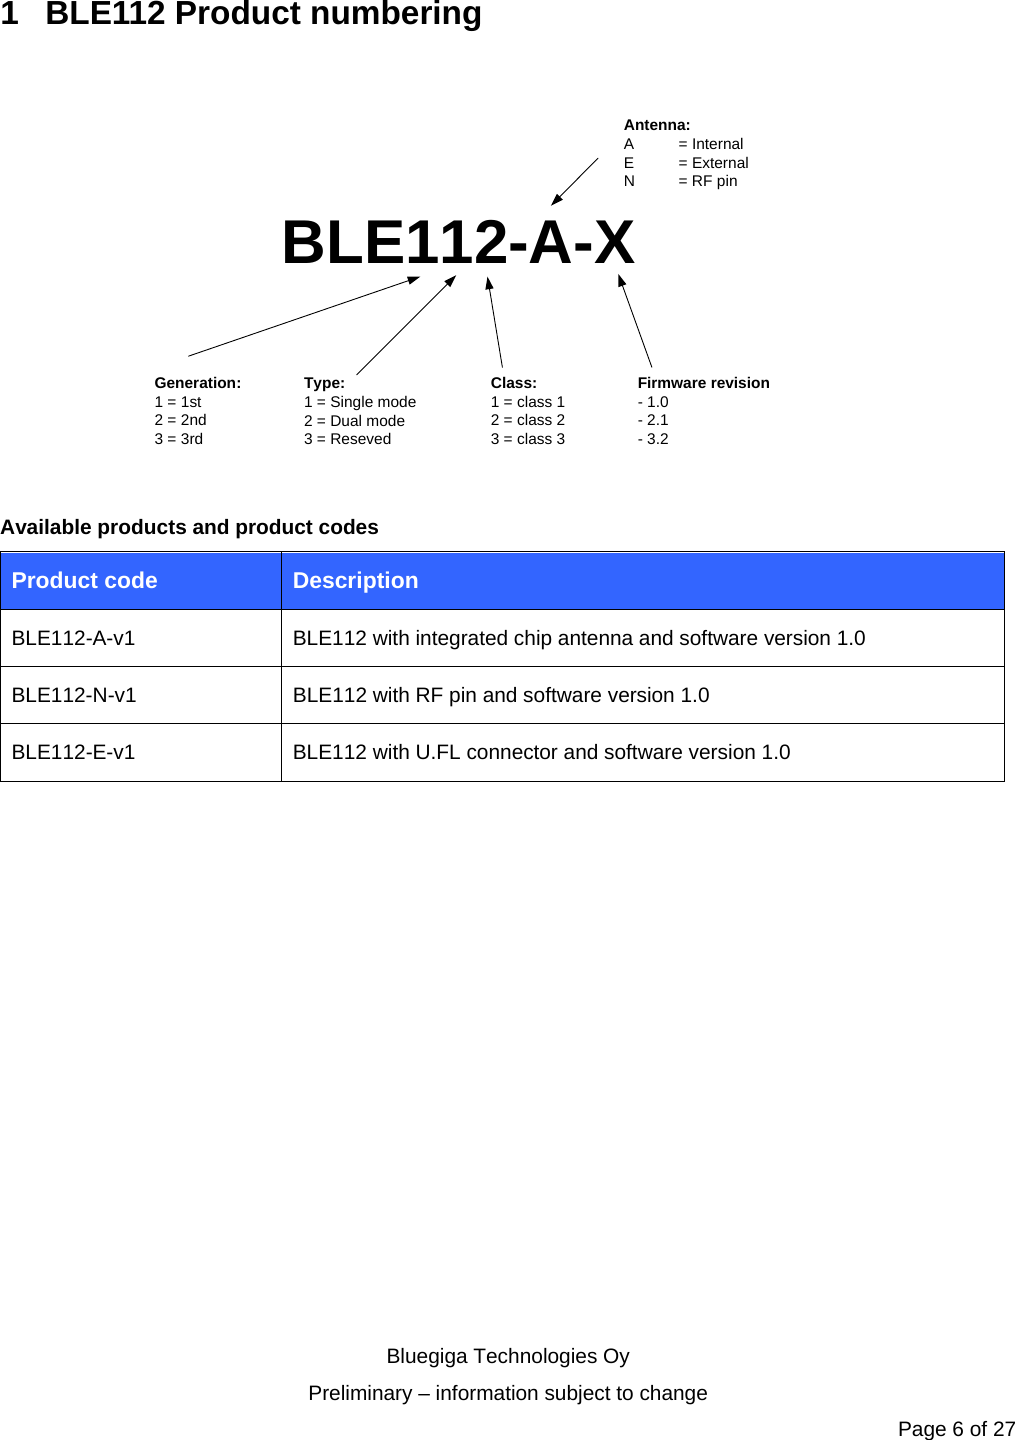   Bluegiga Technologies Oy Preliminary – information subject to change Page 6 of 27 1  BLE112 Product numbering BLE112-A-X             Generation:1 = 1st2 = 2nd3 = 3rdFirmware revision- 1.0- 2.1- 3.2Antenna:A = InternalE = ExternalN = RF pinType:1 = Single mode2 = Dual mode3 = ResevedClass:1 = class 12 = class 23 = class 3 Available products and product codes Product code  Description BLE112-A-v1  BLE112 with integrated chip antenna and software version 1.0 BLE112-N-v1  BLE112 with RF pin and software version 1.0 BLE112-E-v1  BLE112 with U.FL connector and software version 1.0 